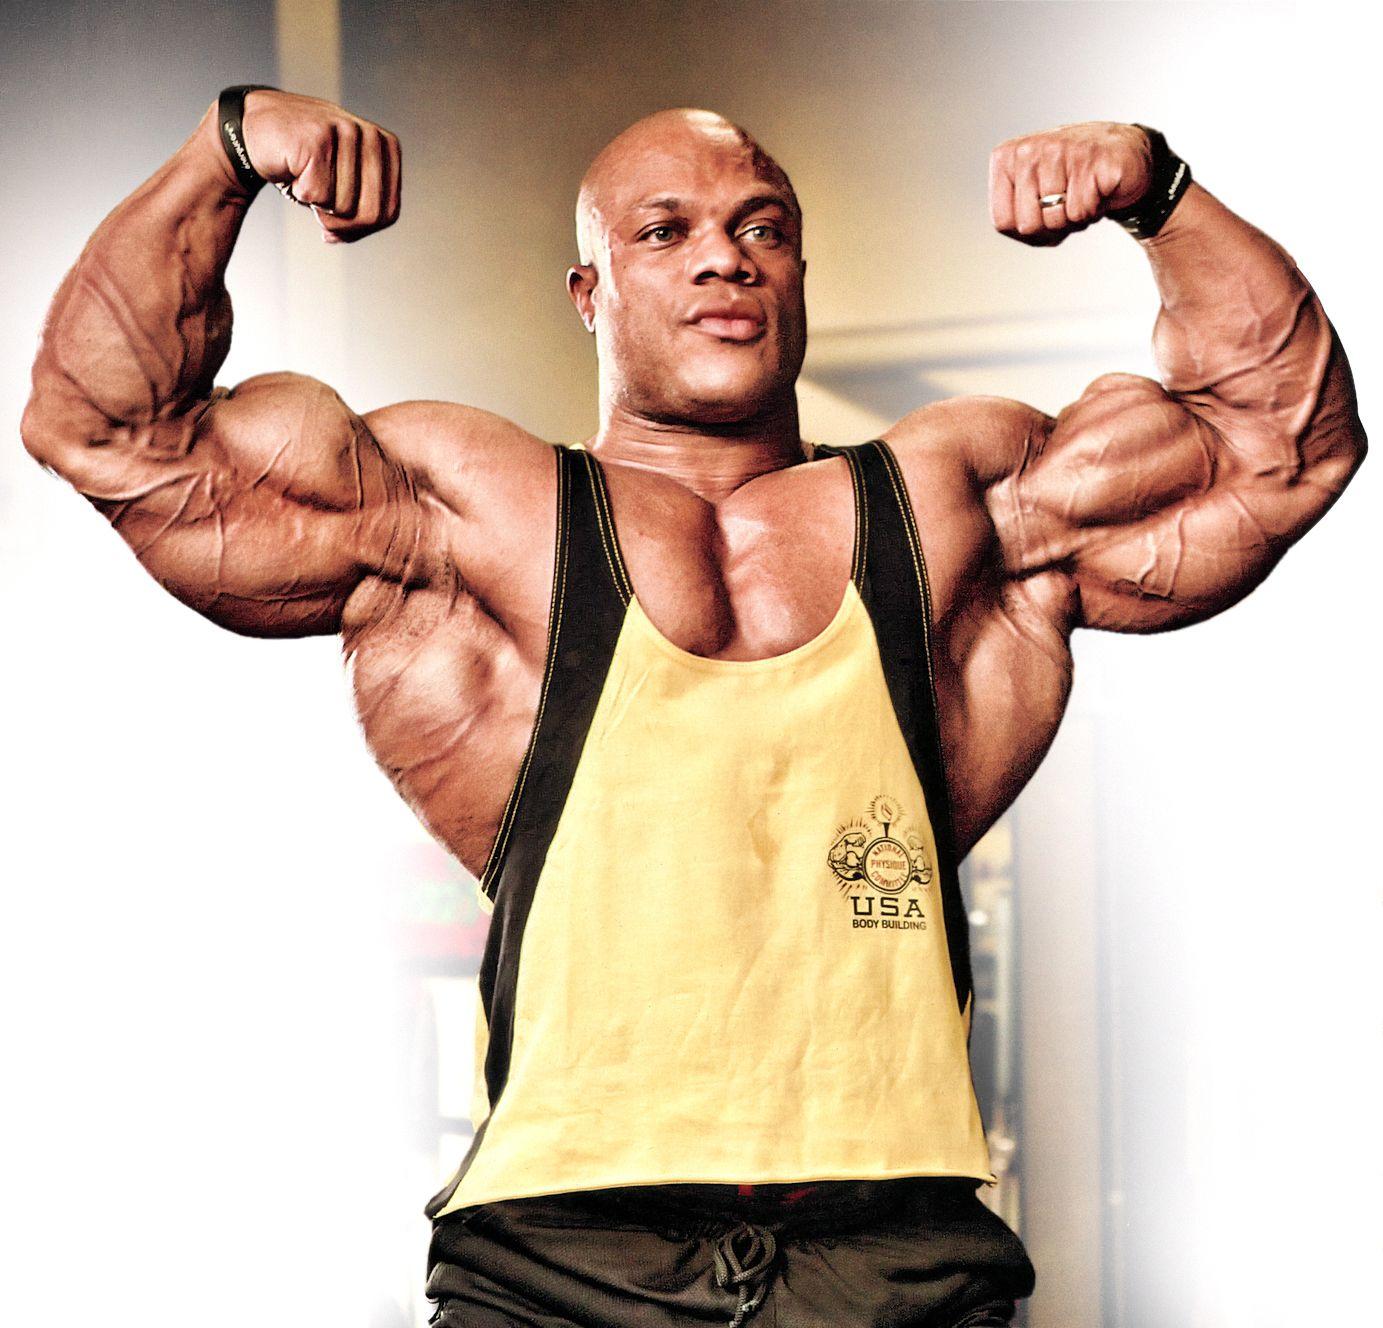 Phil Heath mr Olympia, HD Wallpapers 2013 All About HD Wallpapers.